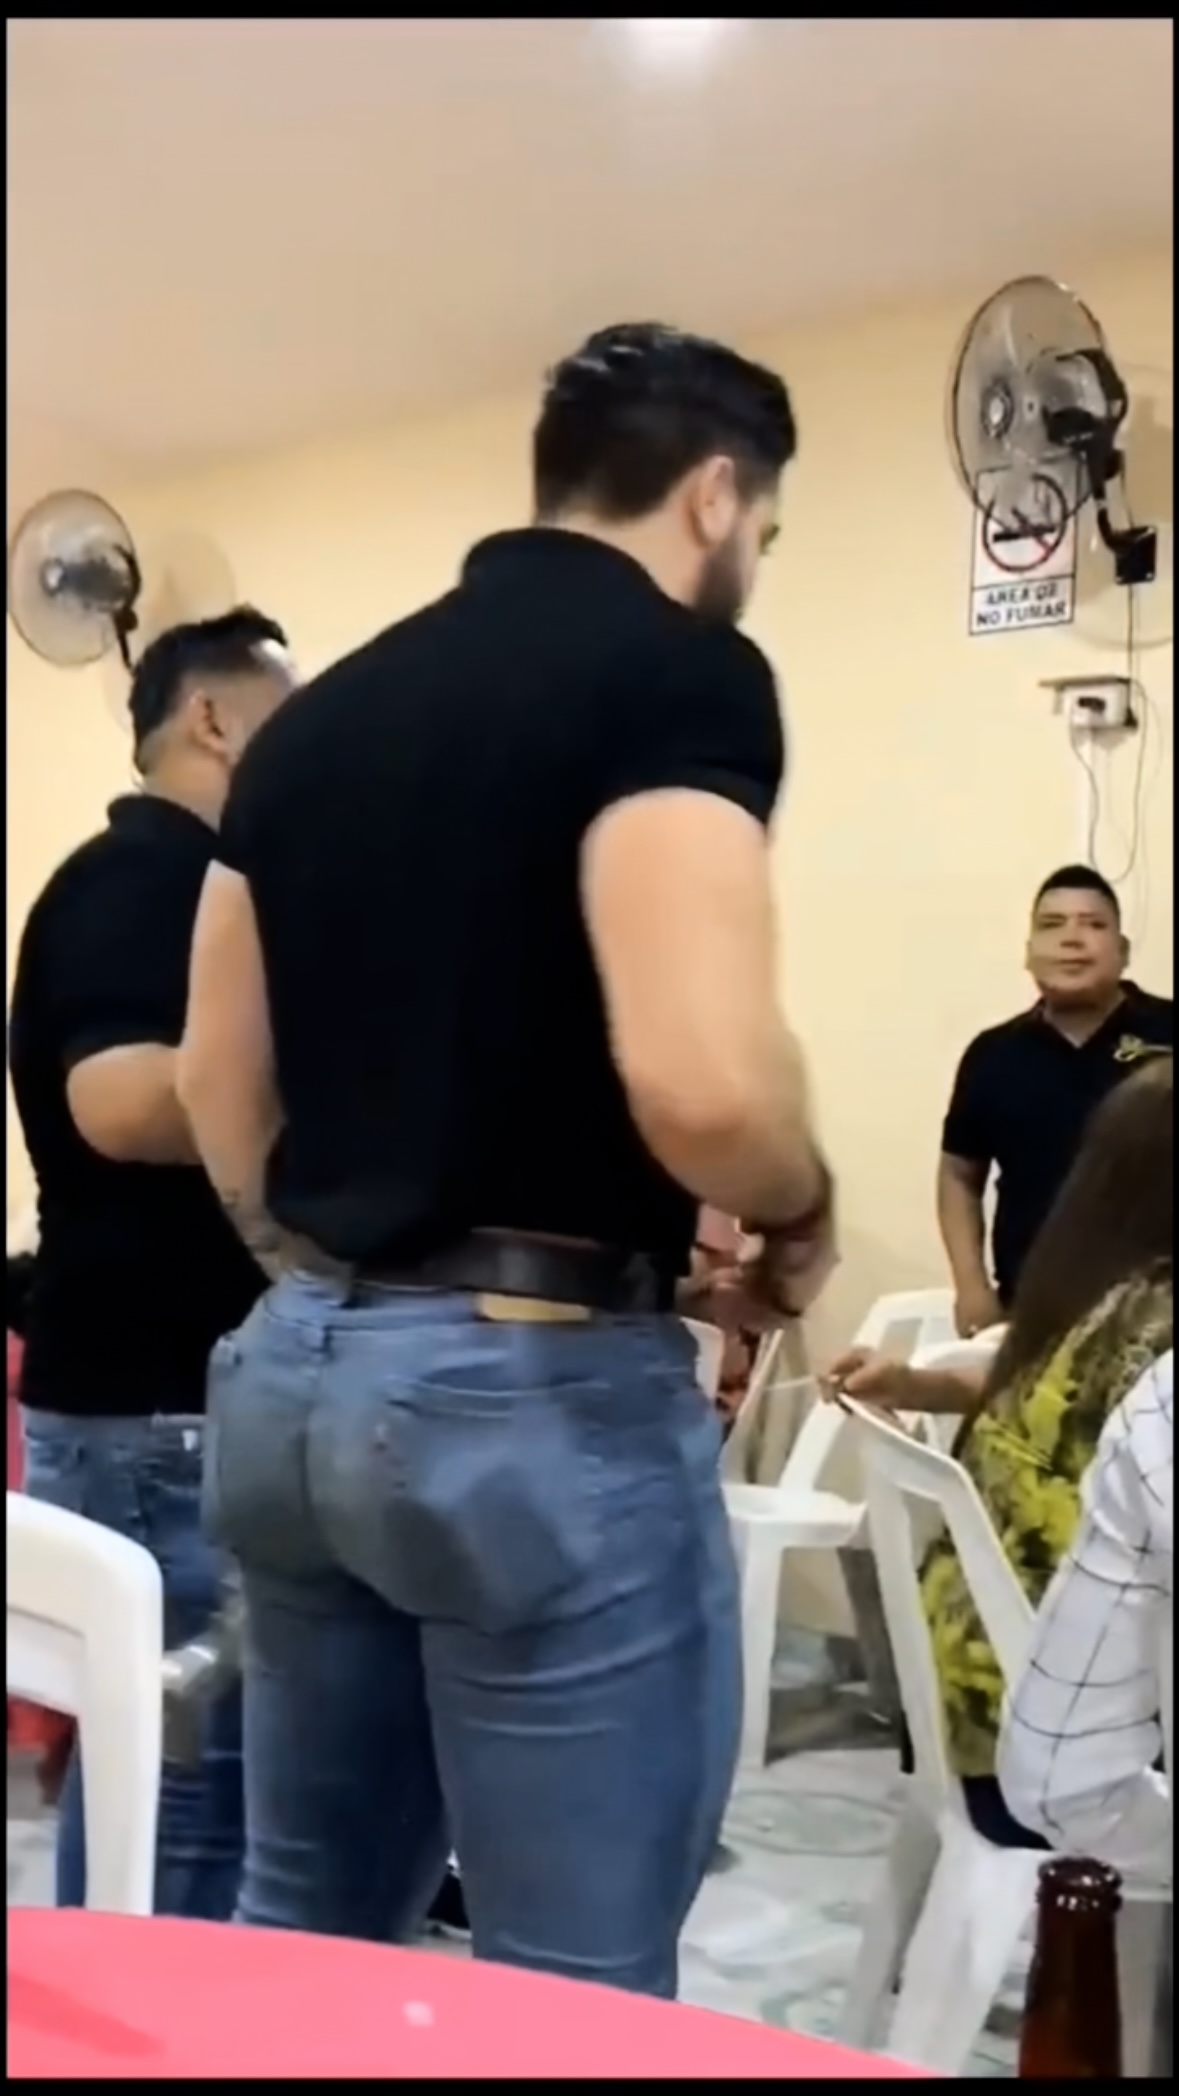 Latino trumpeter’s juicy bulge and ass wearing jeans